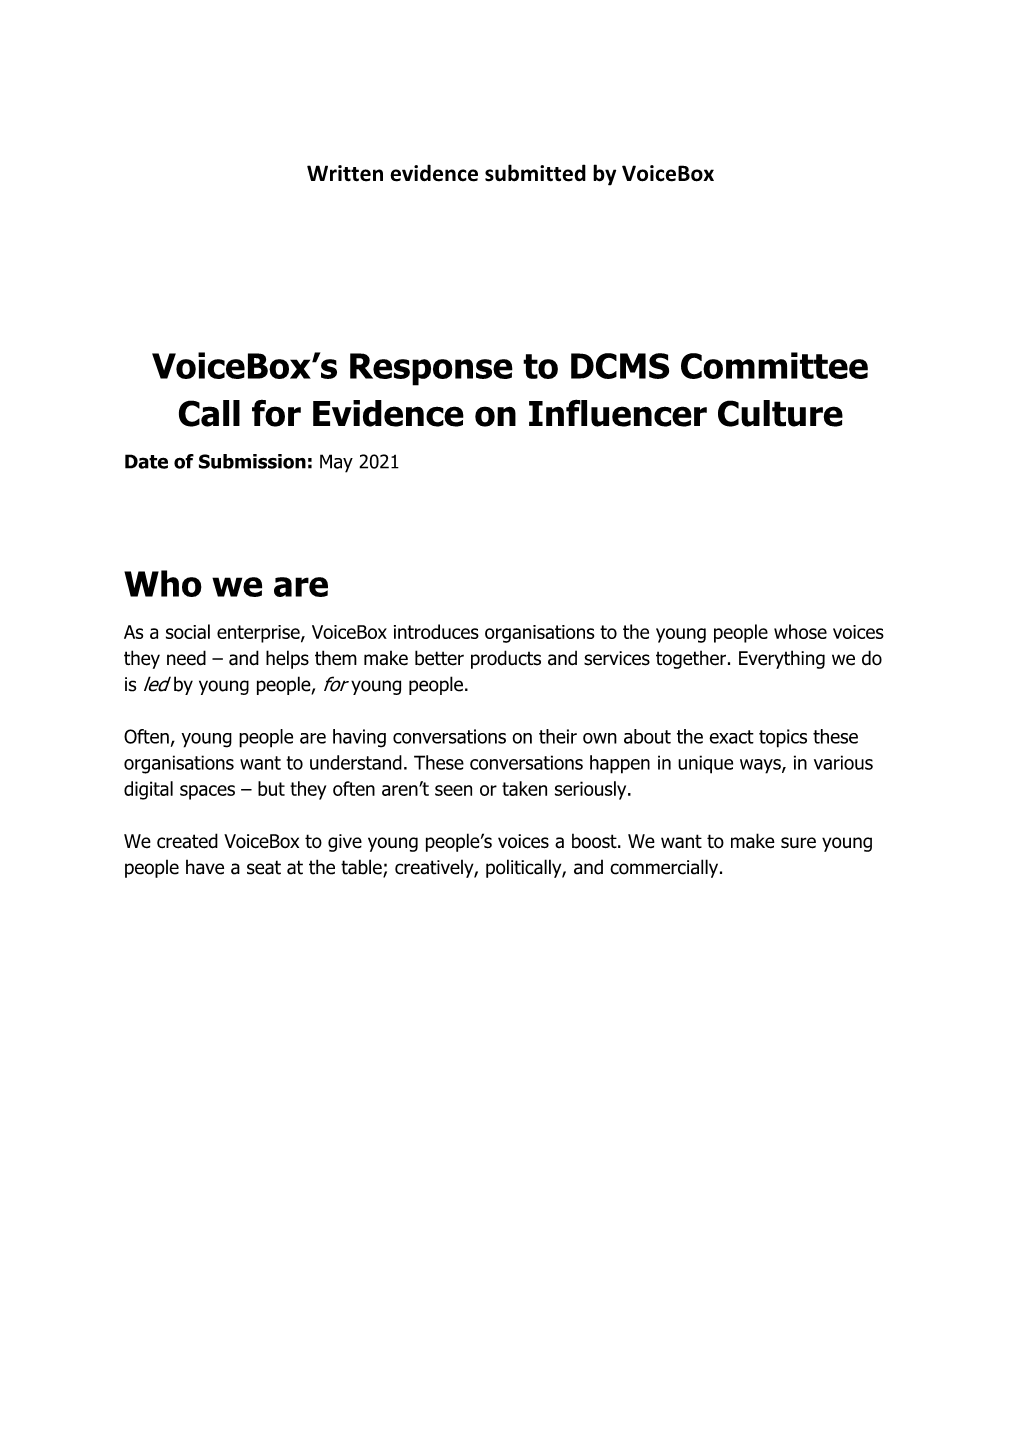 Voicebox's Response to DCMS Committee Call for Evidence On